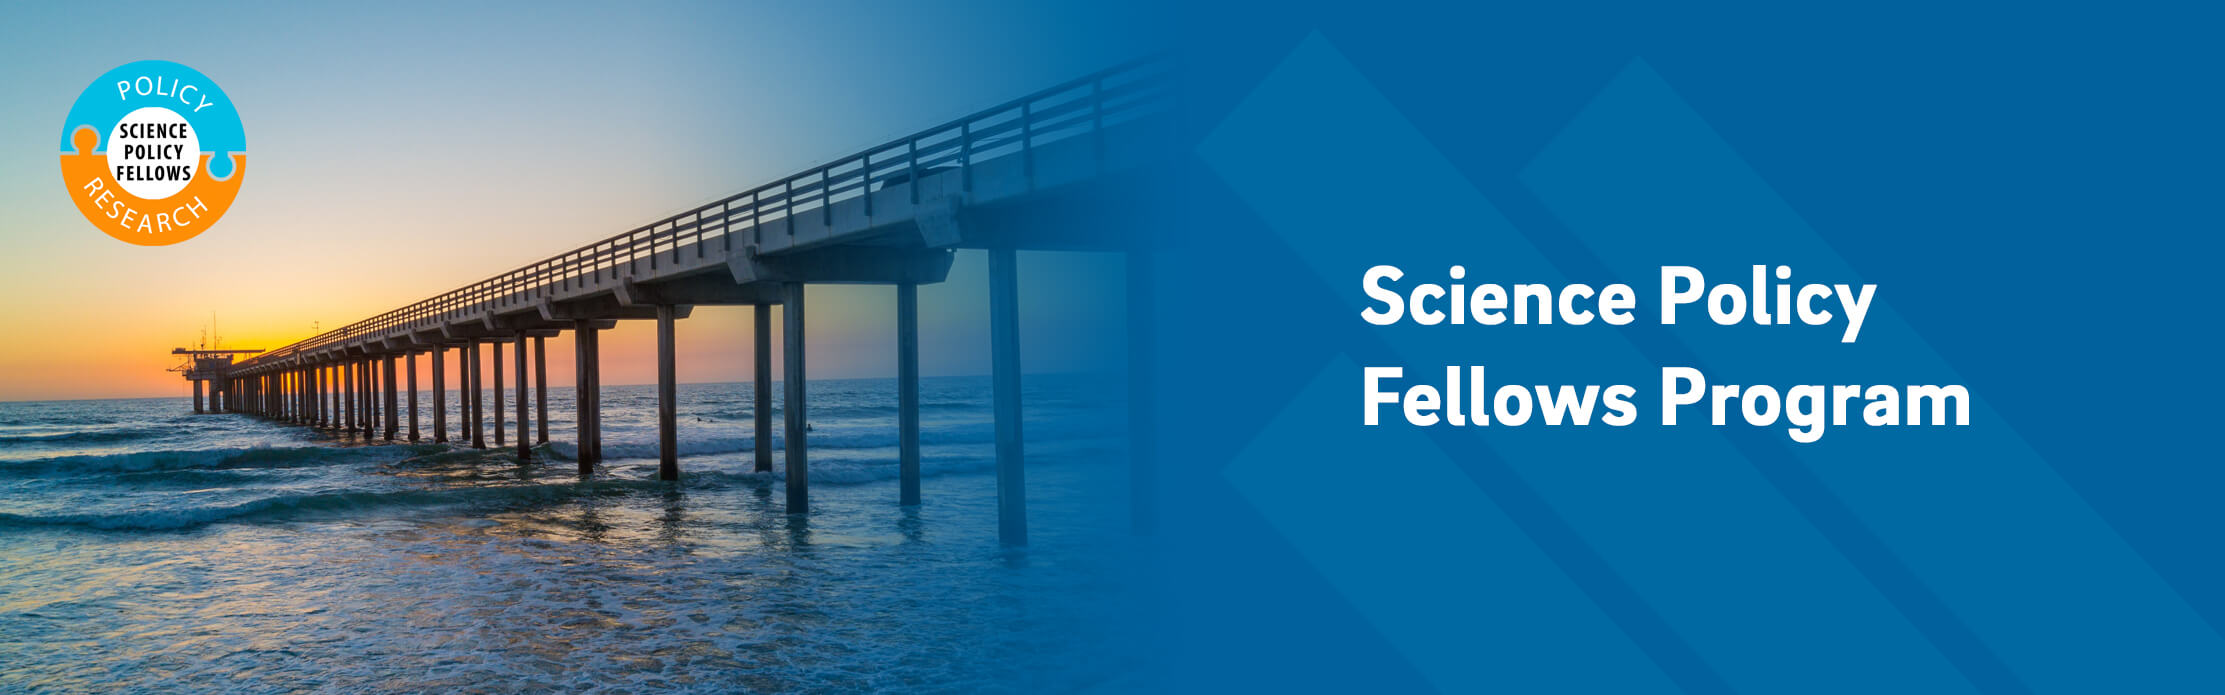 Photo of the Scripps Pier at sunset with the Science Policy Fellows logo in the top left; the right side has a blue overlay with the UC San Diego branded element of a stylized trident